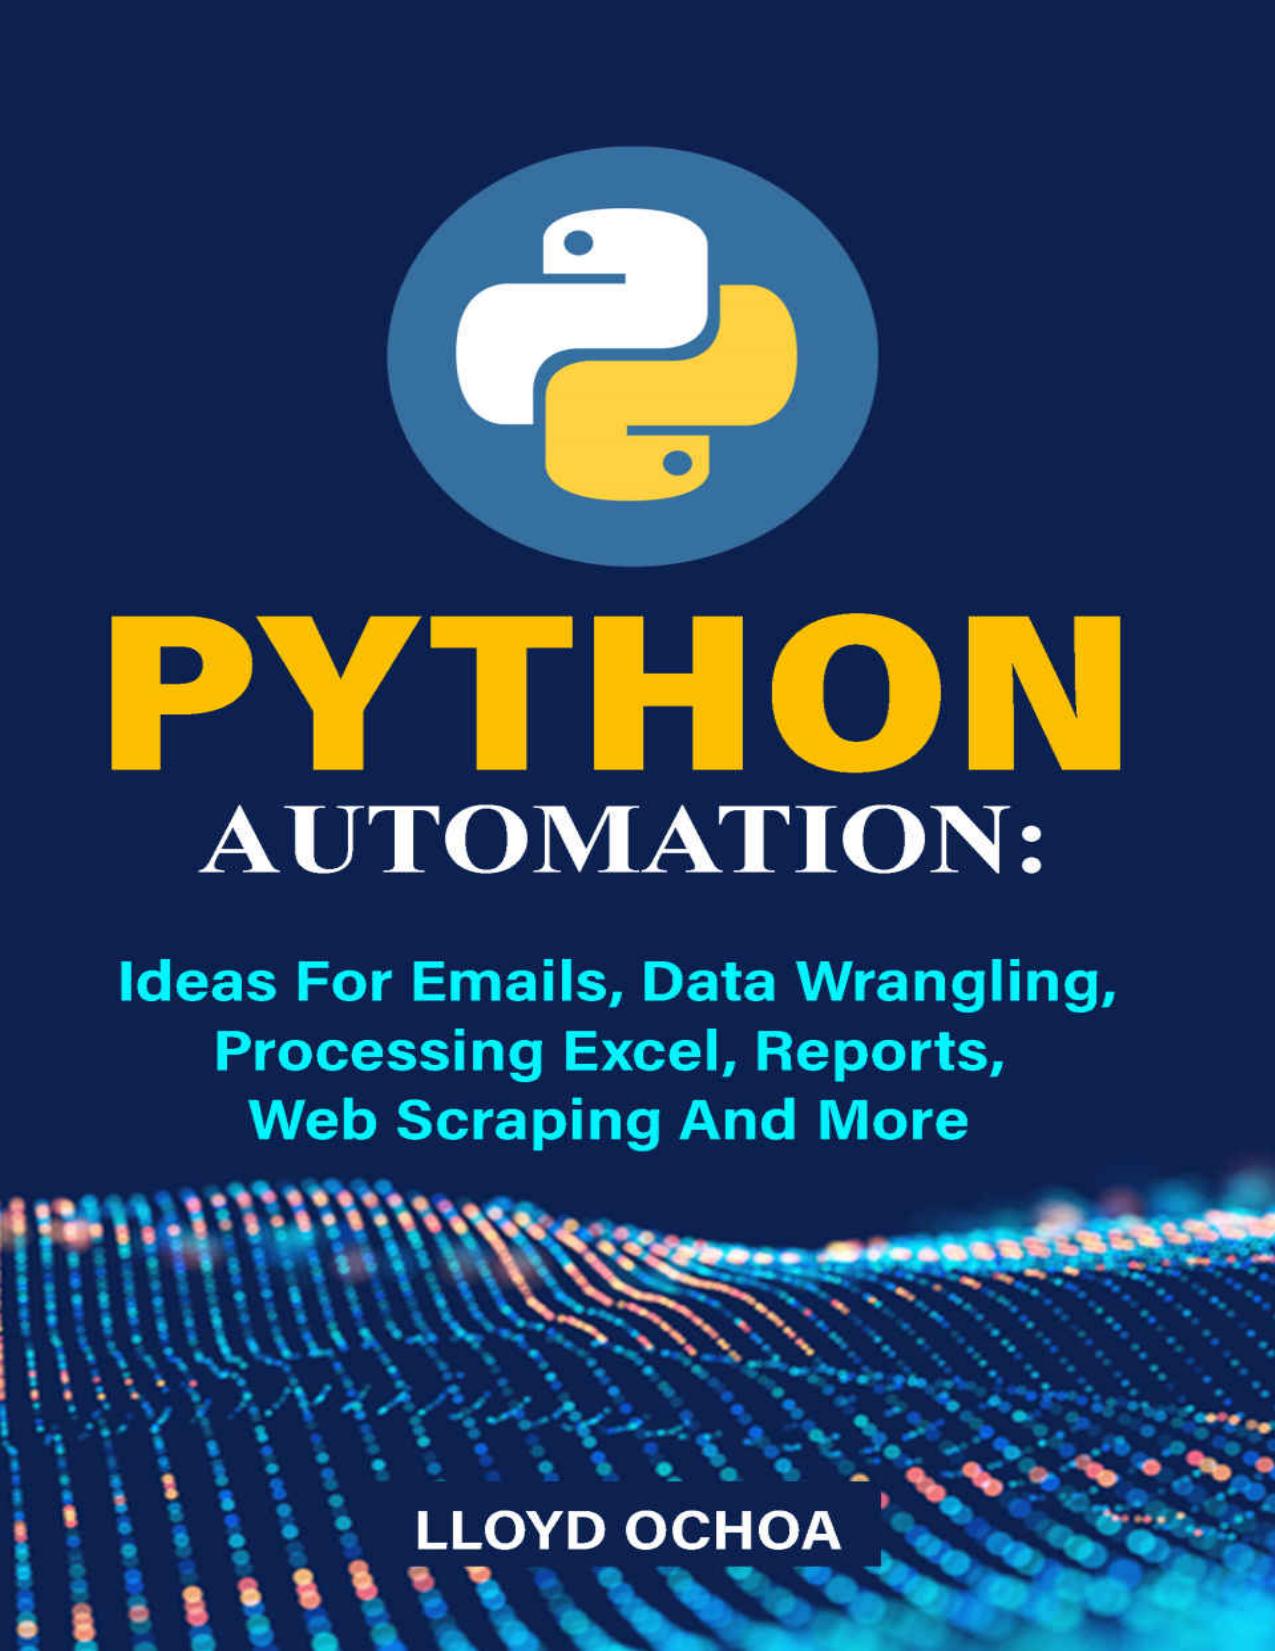 Python Automation: Ideas For Emails, Data Wrangling, Processing Excel, Reports, Web Scraping And More